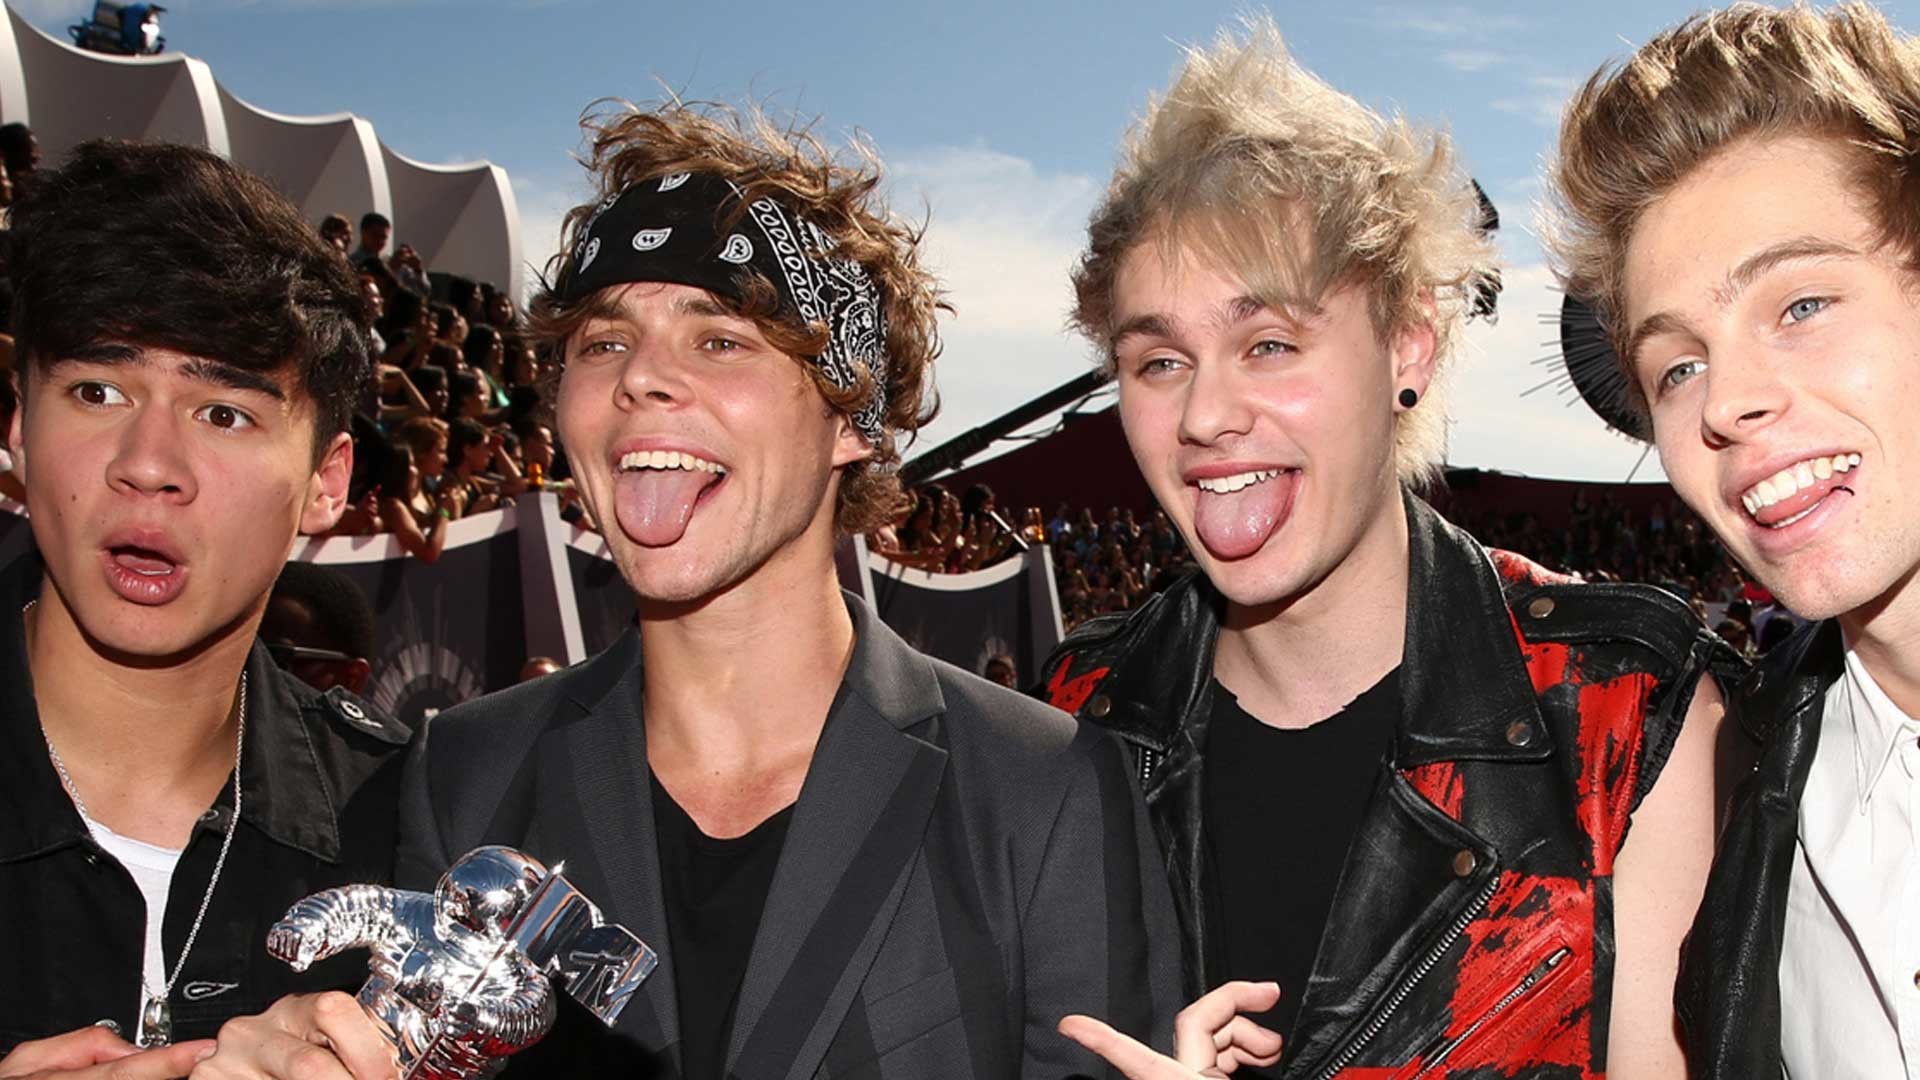 1920x1080 The 411 on 5 Seconds of Summer